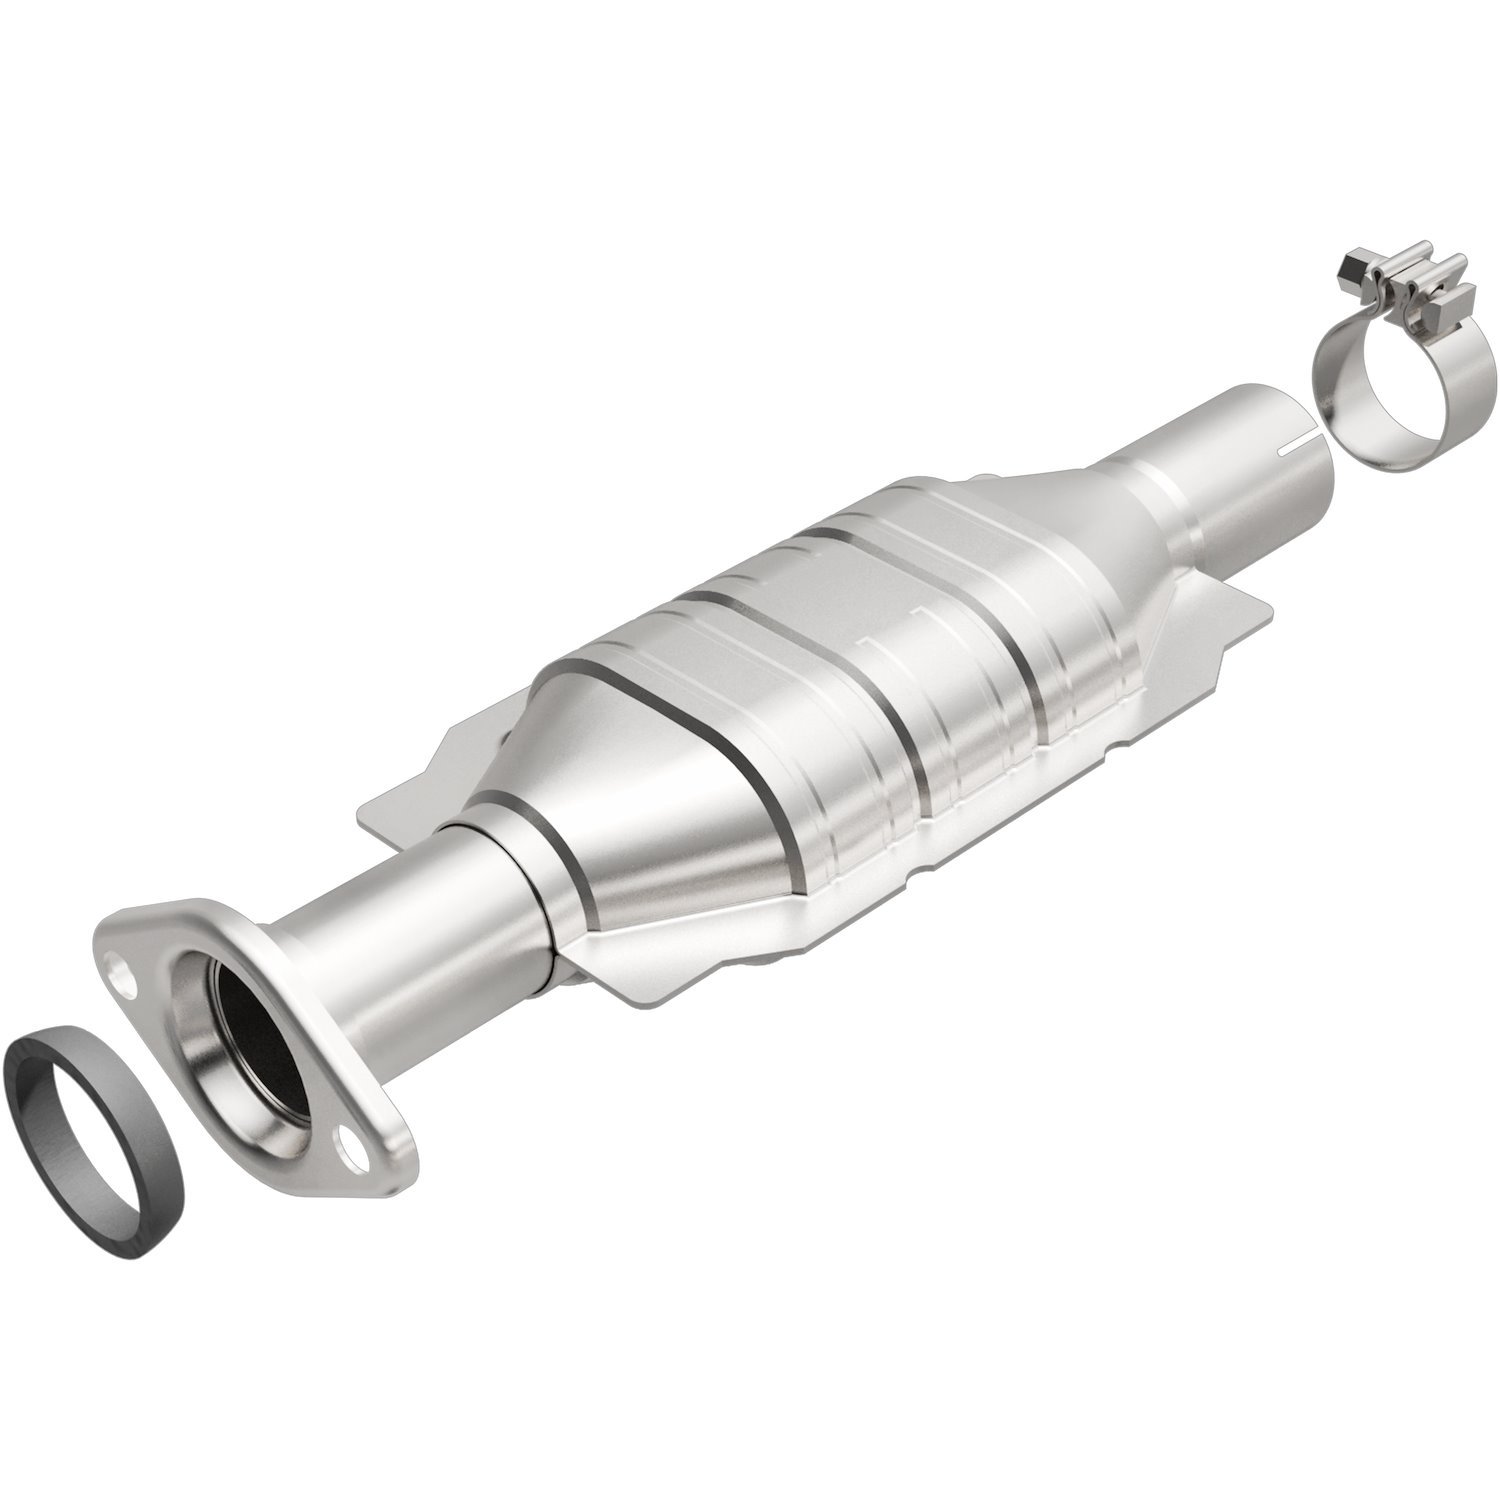 OEM Grade Federal / EPA Compliant Direct-Fit Catalytic Converter 51518